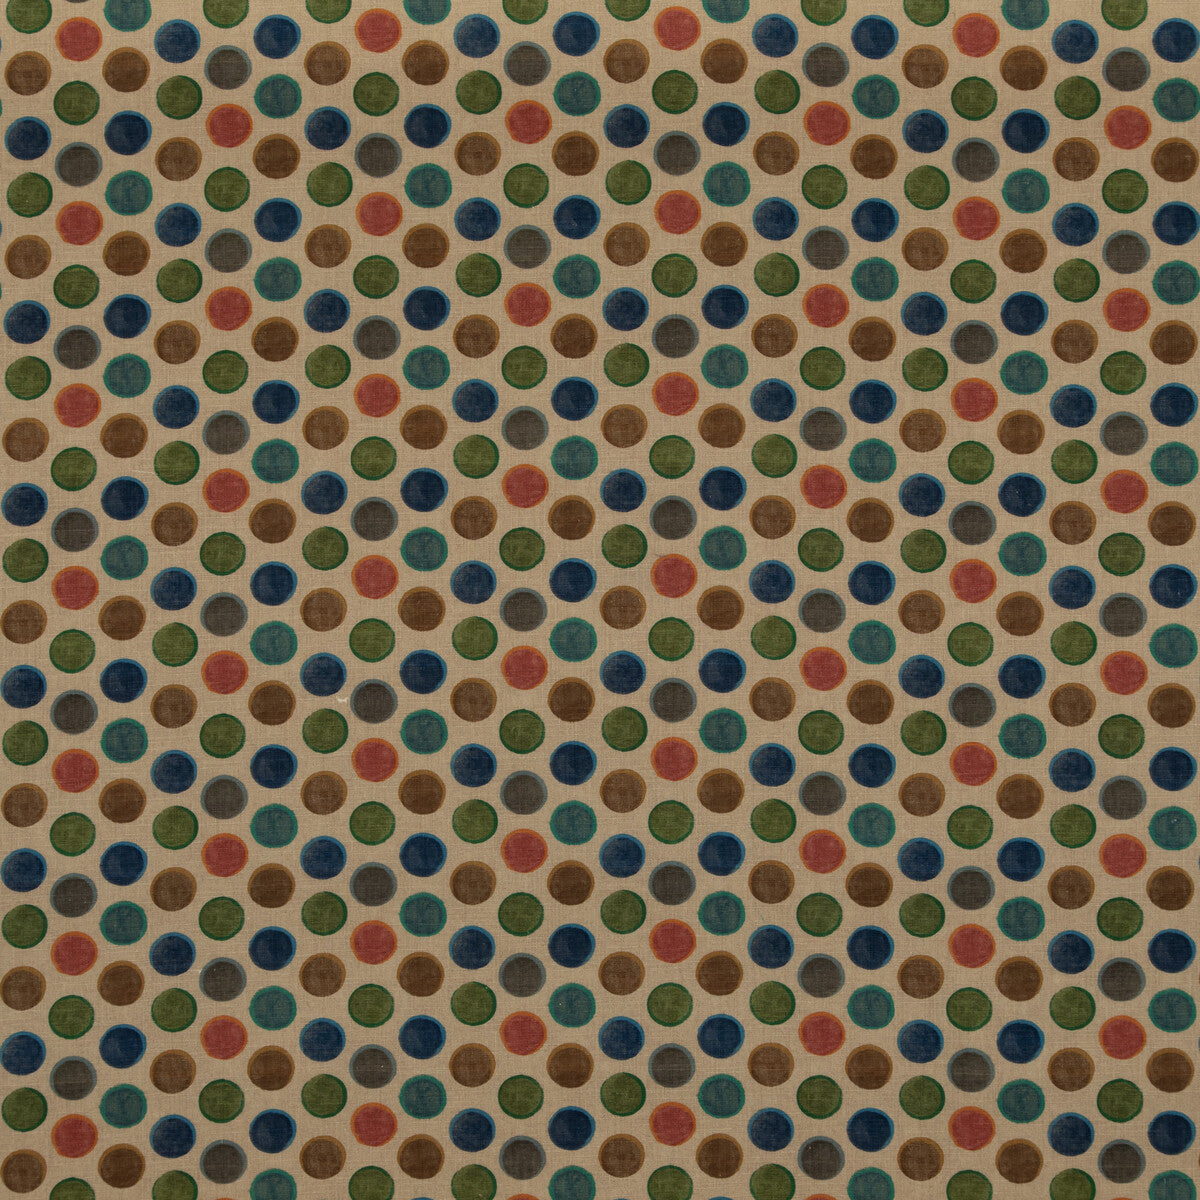 Croquet fabric in teal color - pattern FD2006.R11.0 - by Mulberry in the Mulberry Long Weekend collection